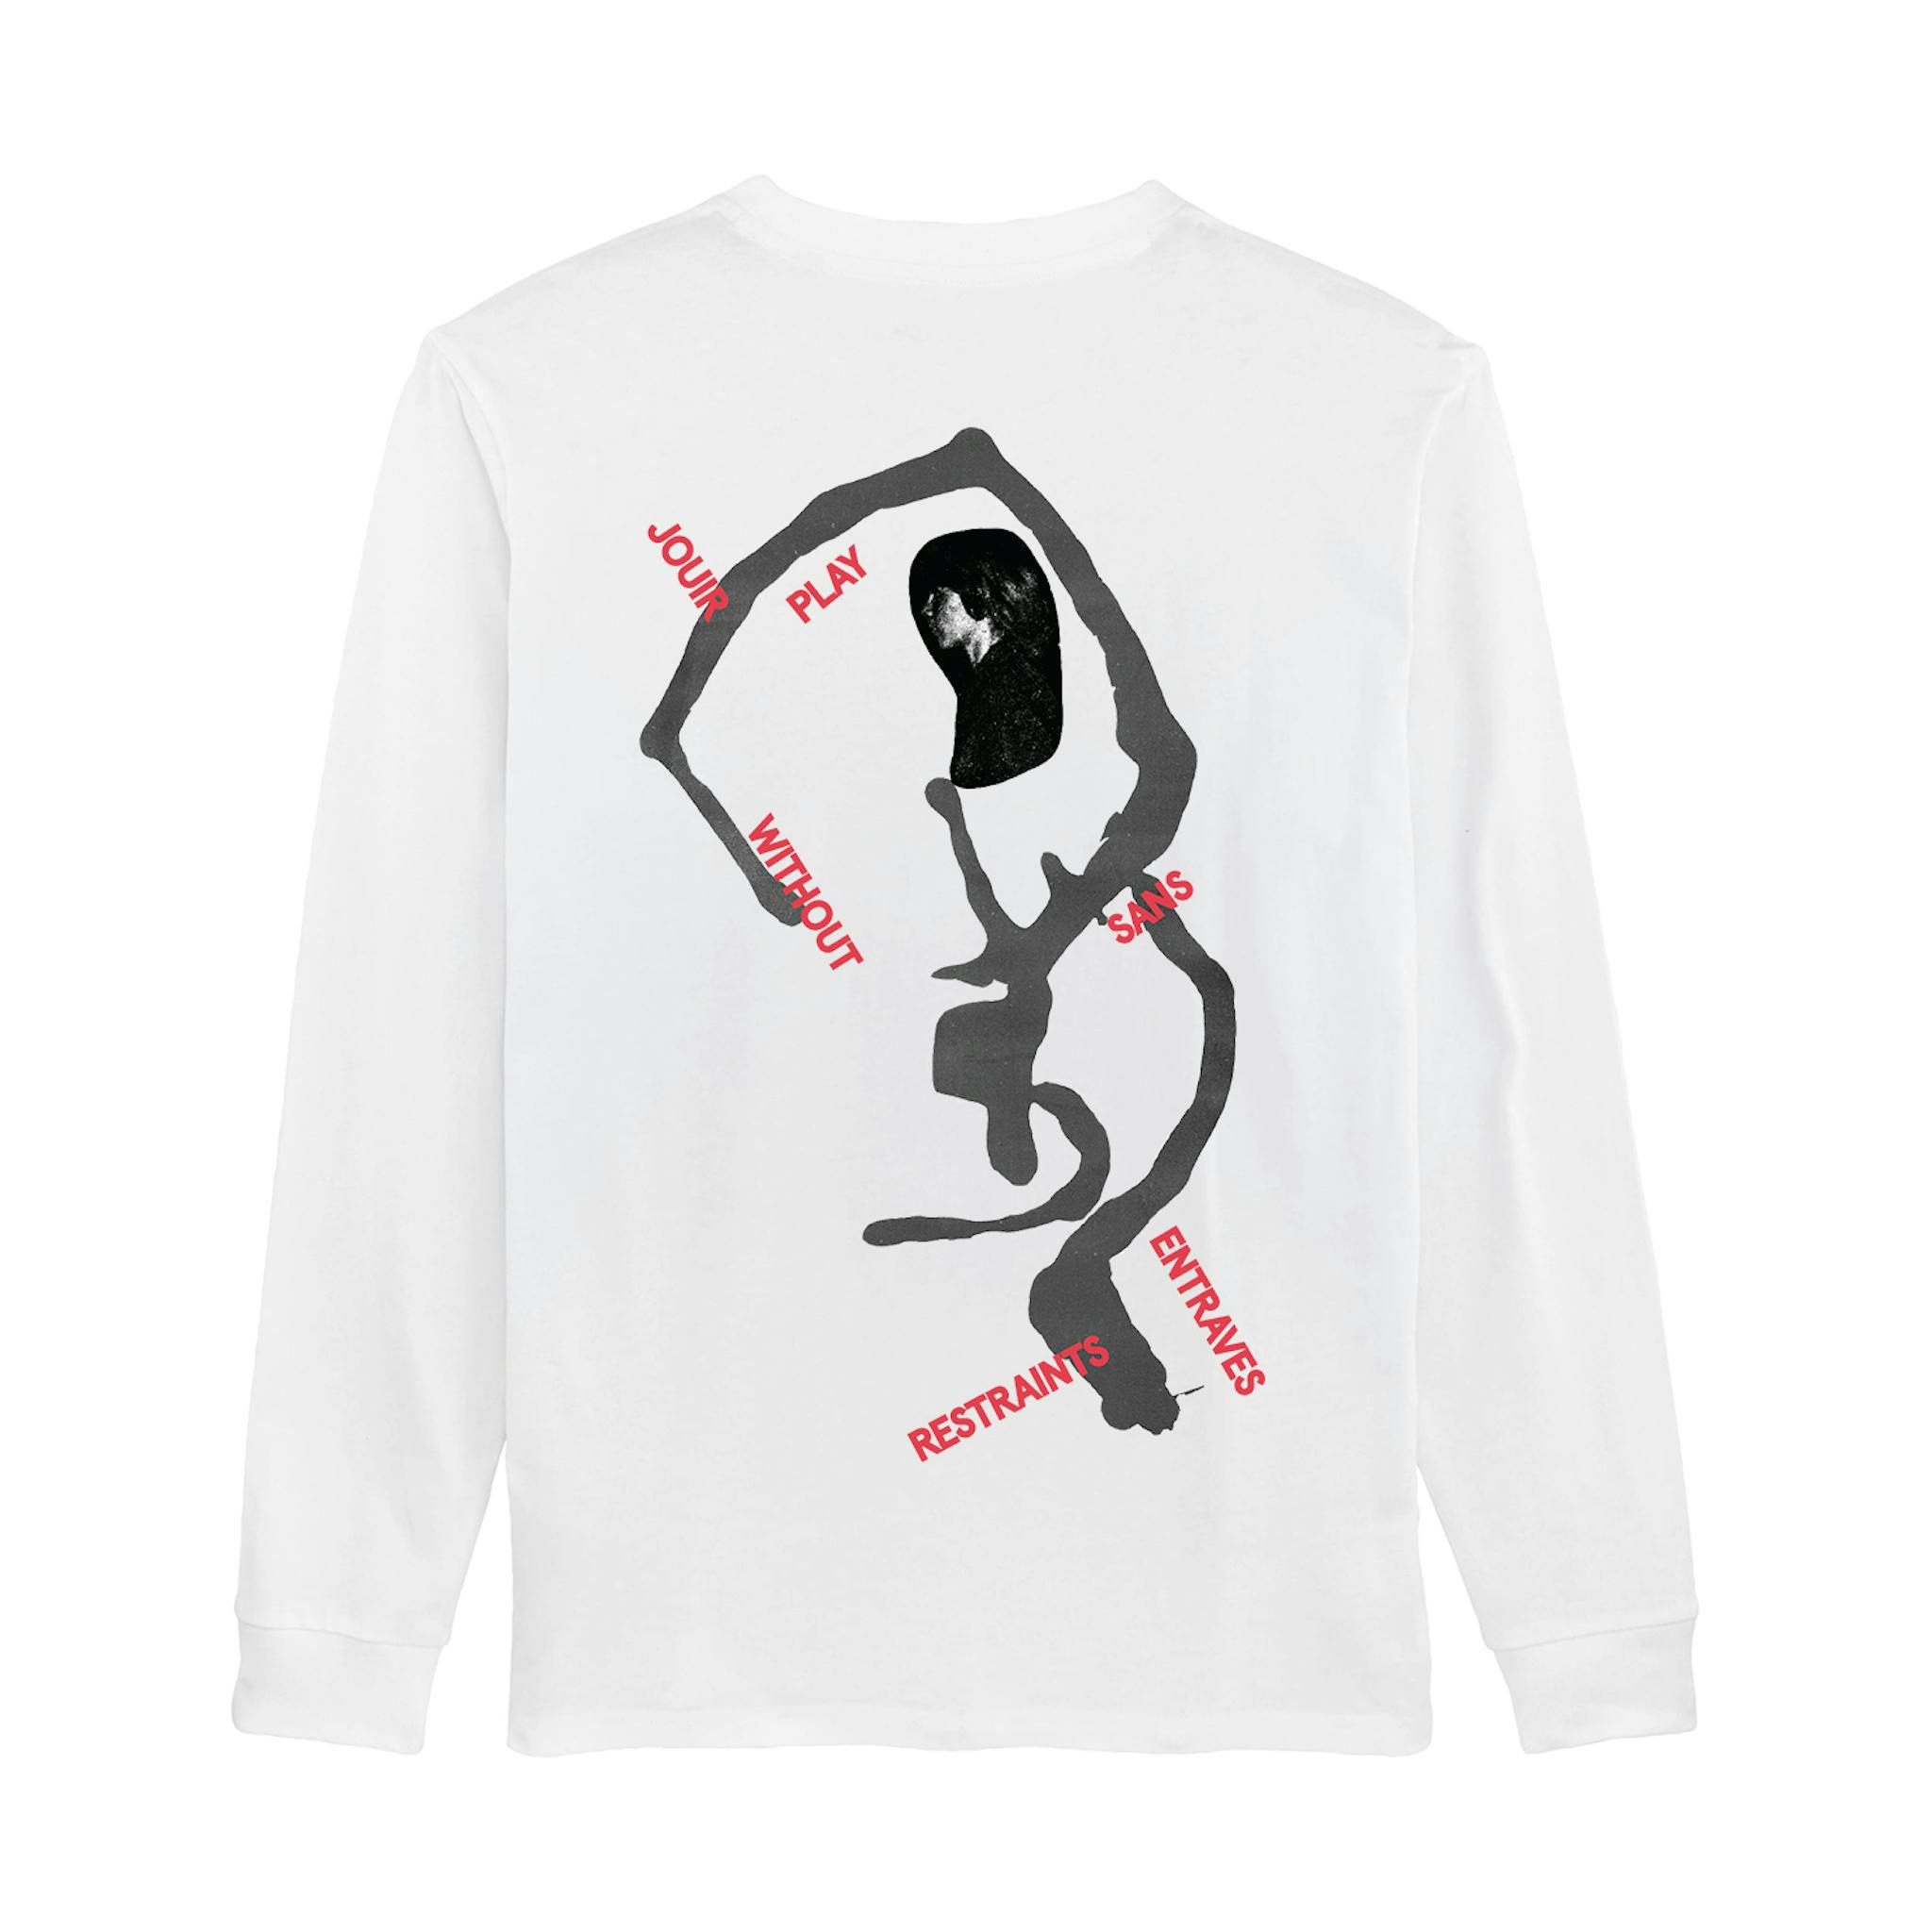 A white long sleeve shirt with a grey abstract graphic and red words placed around.